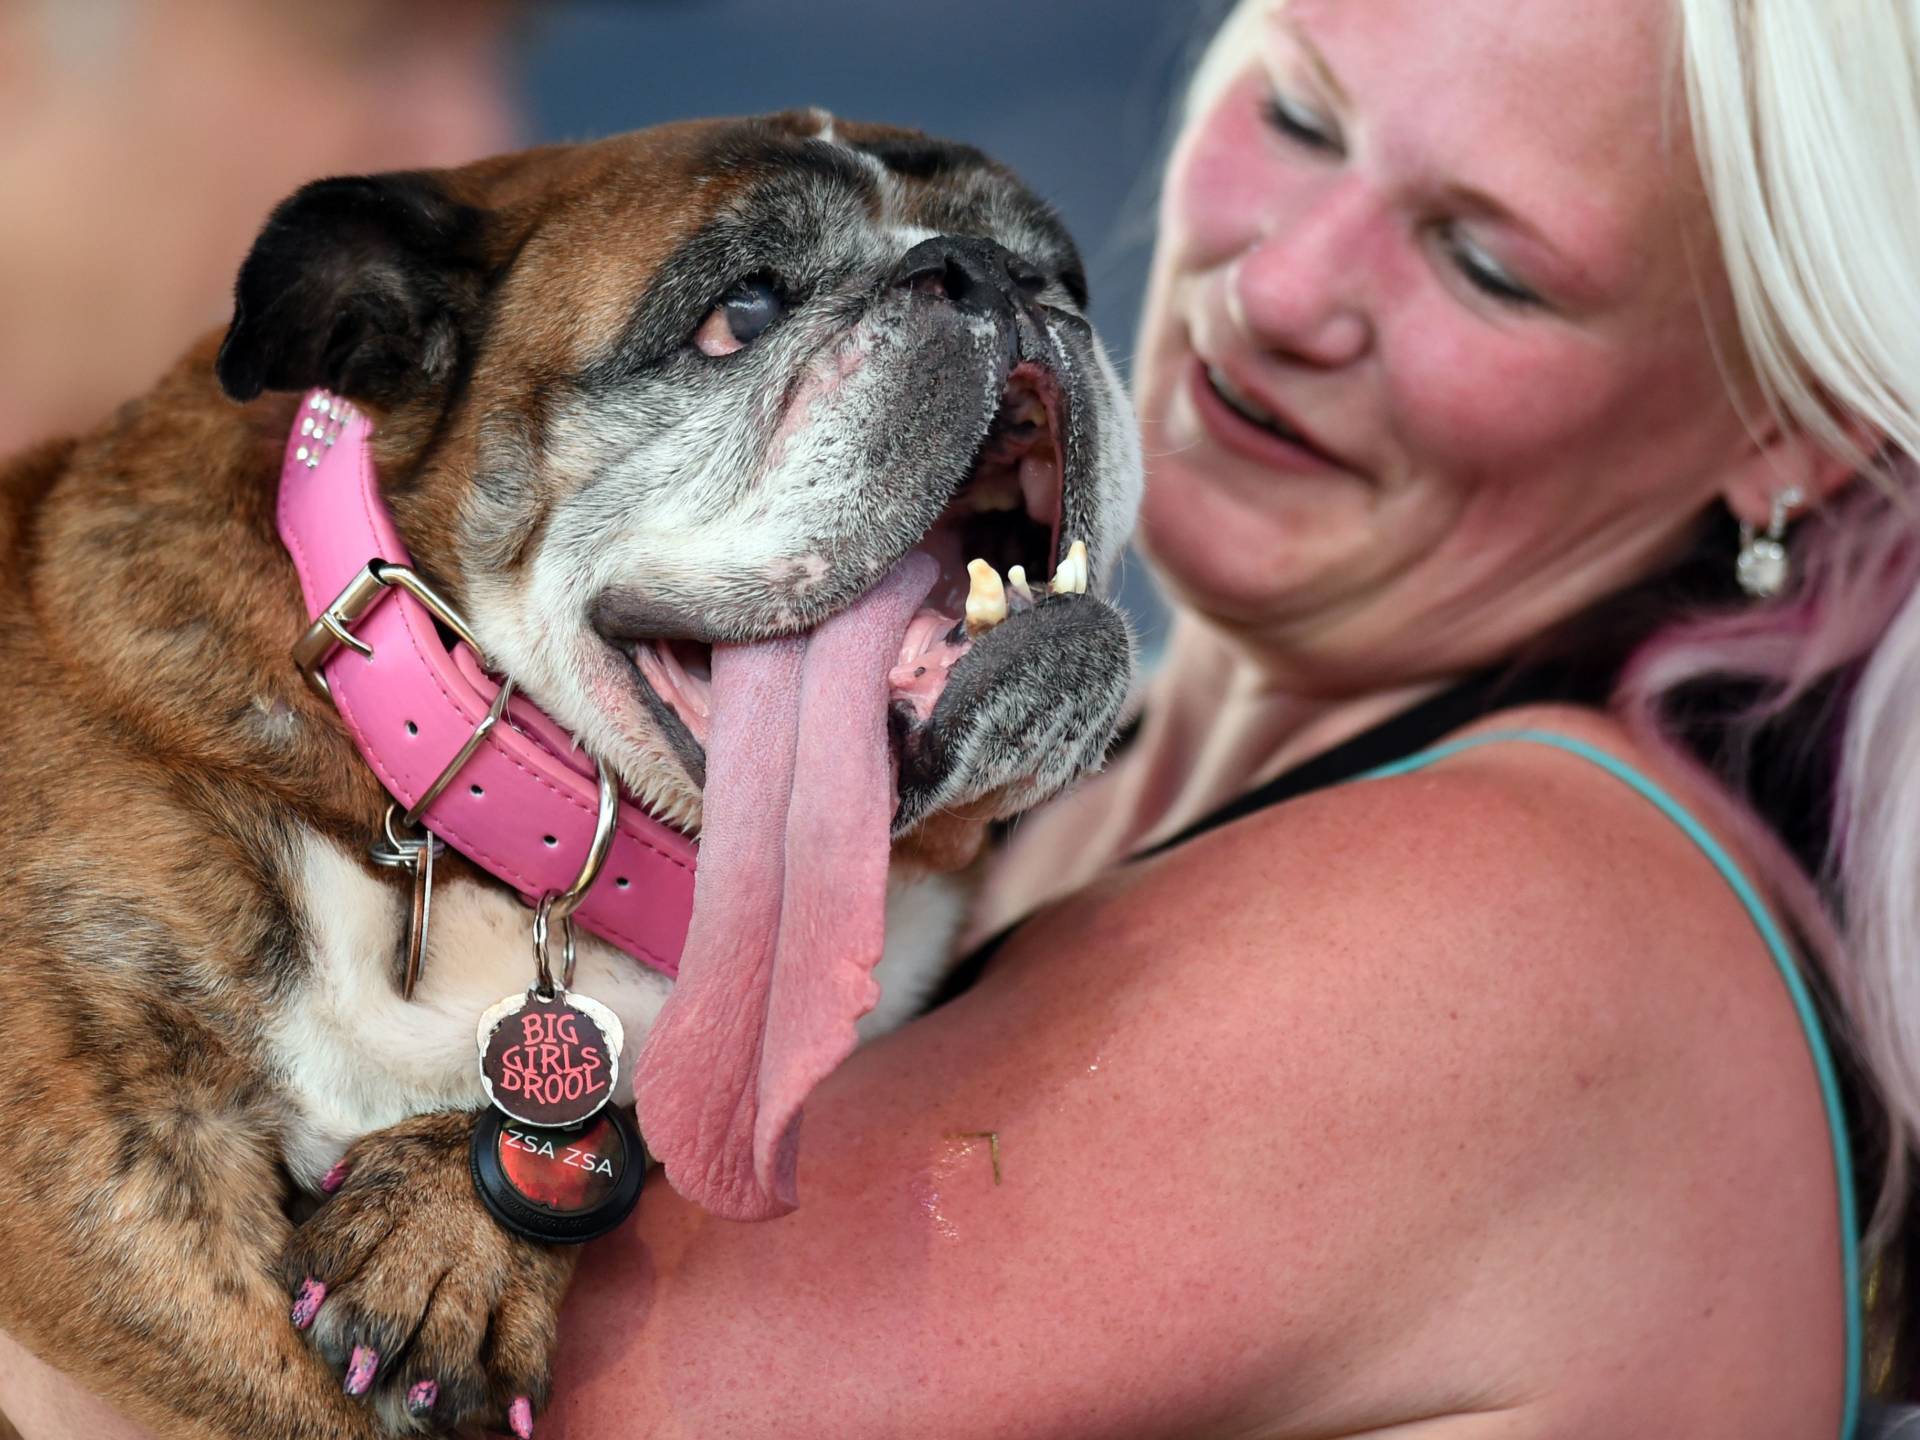 Zsa Zsa, an English bulldog, won the World's Ugliest Dog competition this weekend in Petaluma, Calif. She's seen here with her owner, Megan Brainard of Minnesota. Josh Edelson/AFP/Getty Images